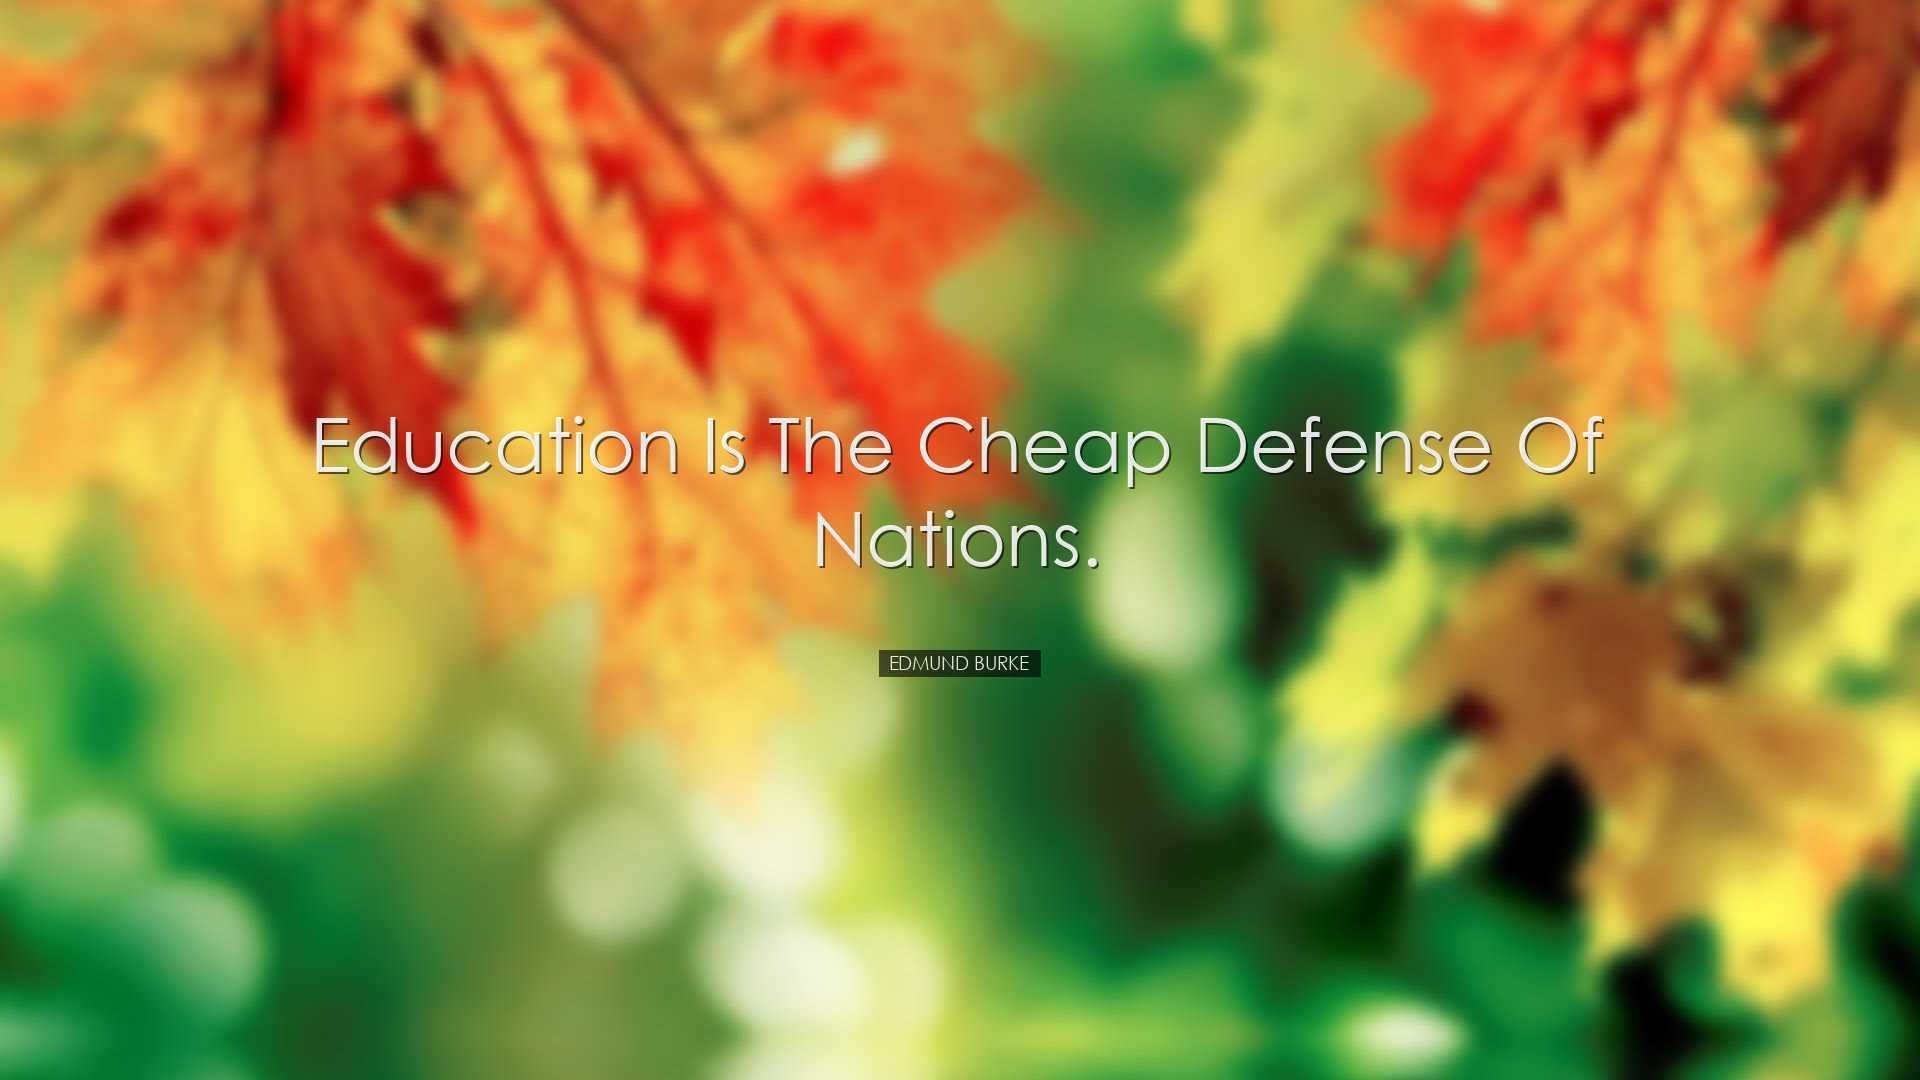 Education is the cheap defense of nations. - Edmund Burke